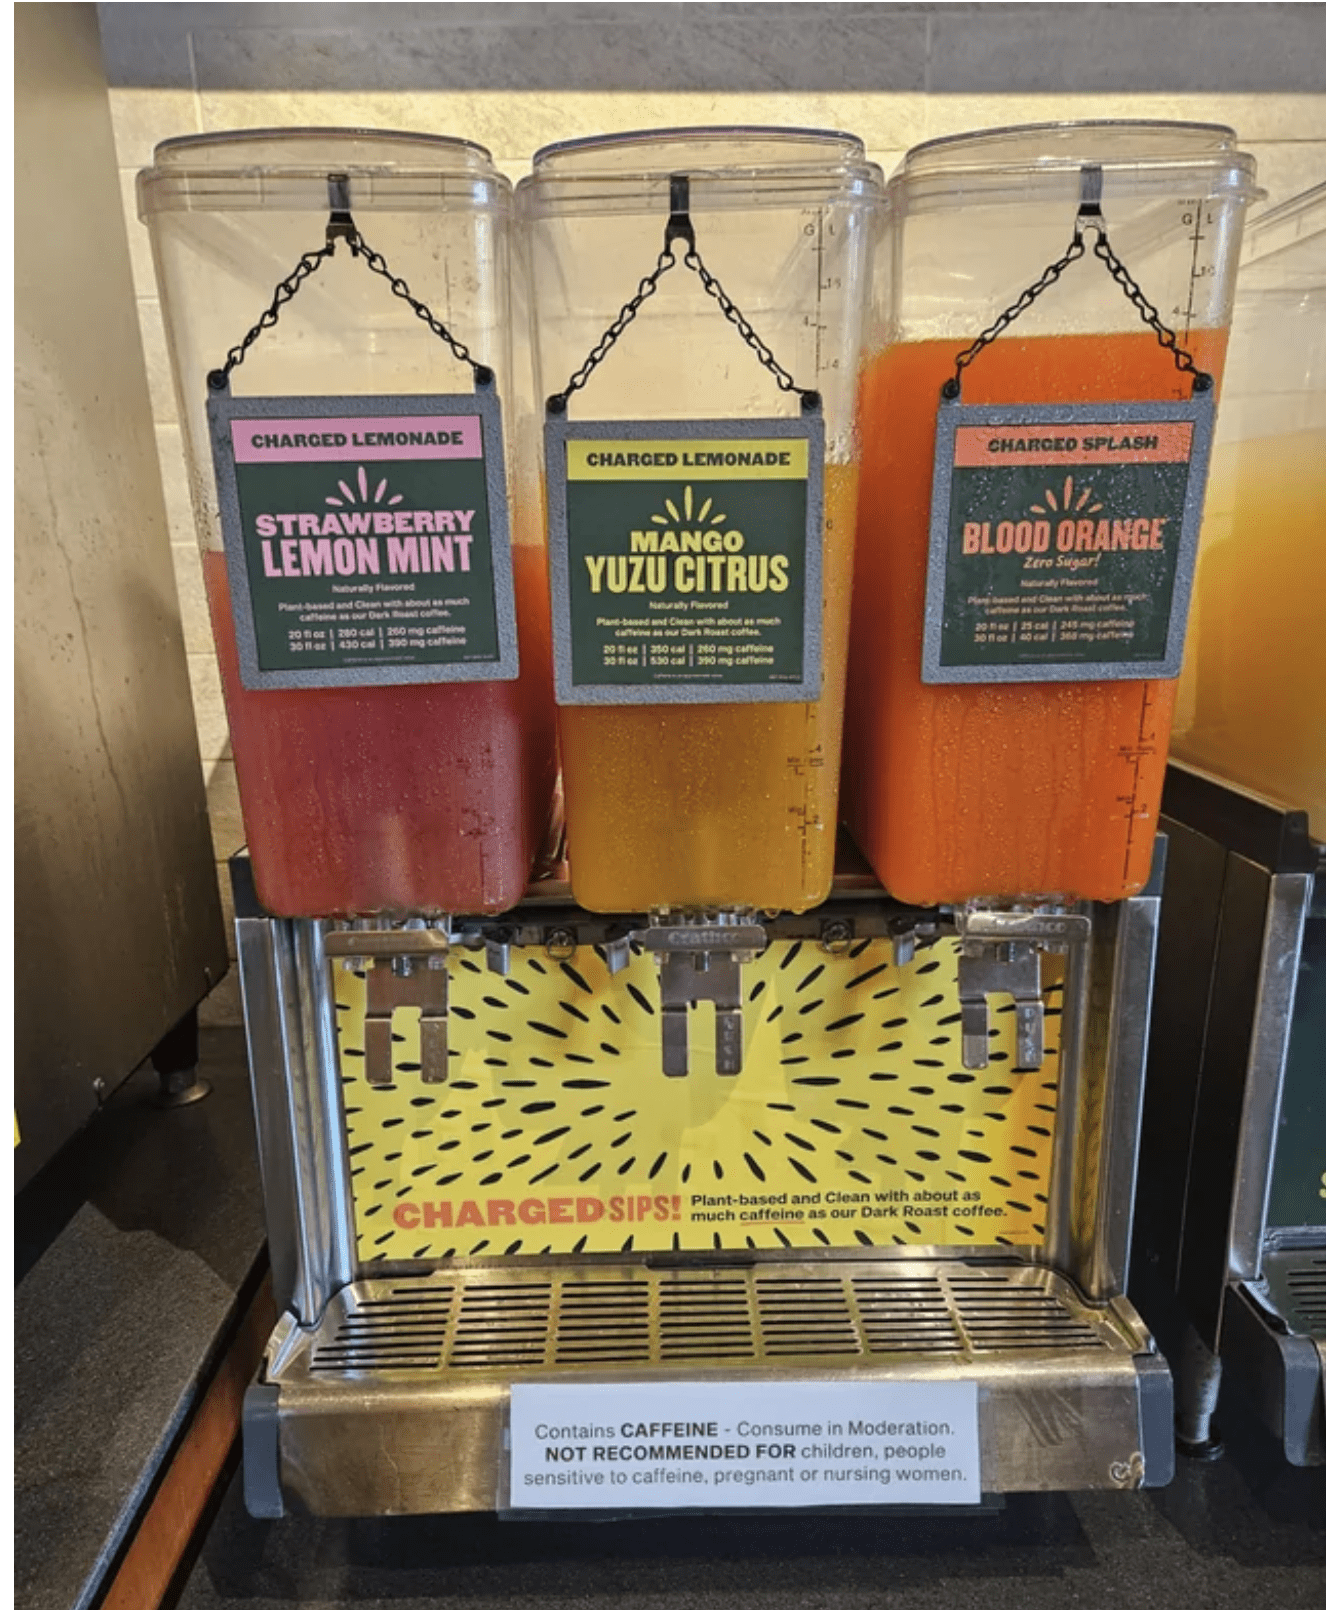 Dispensers for Charged Lemondade, a caffeinated lemonade drink, at Panera Bread